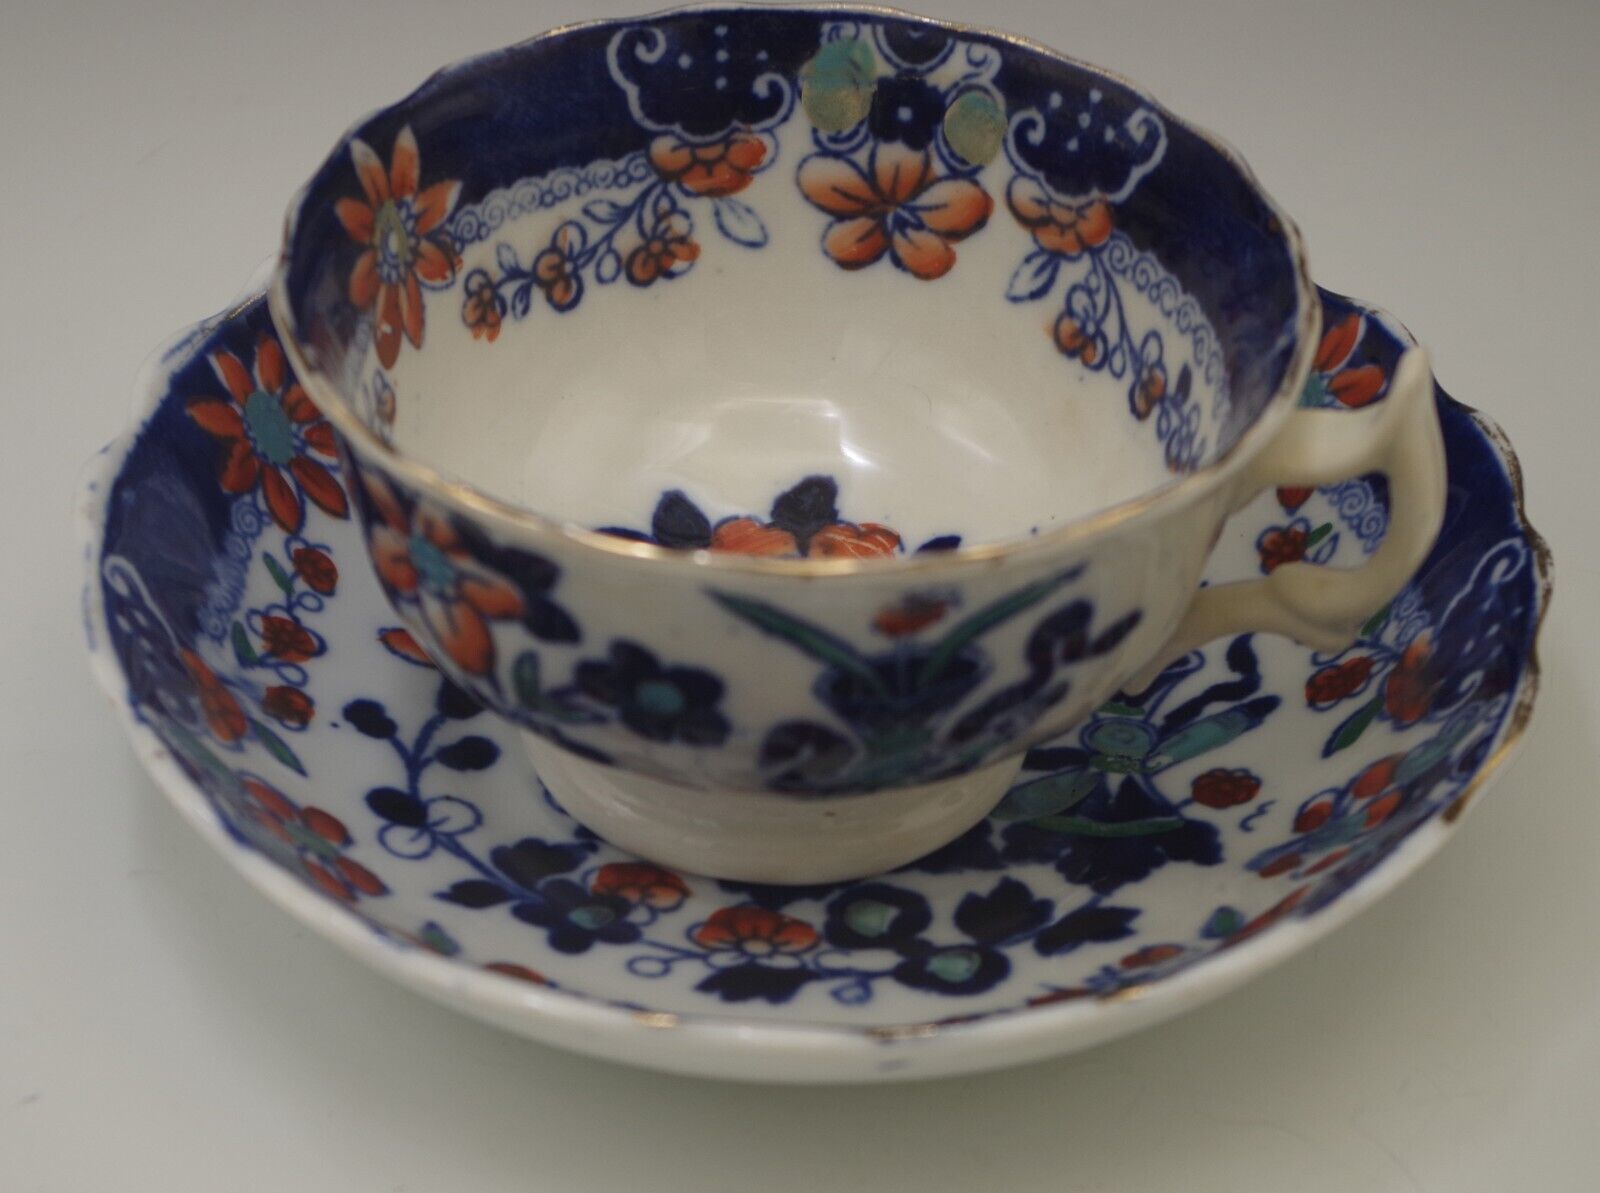 ANTIQUE c.1860 STAFFORDSHIRE COBALT AND RUST CHINOISERIE CUP AND SAUCER SET